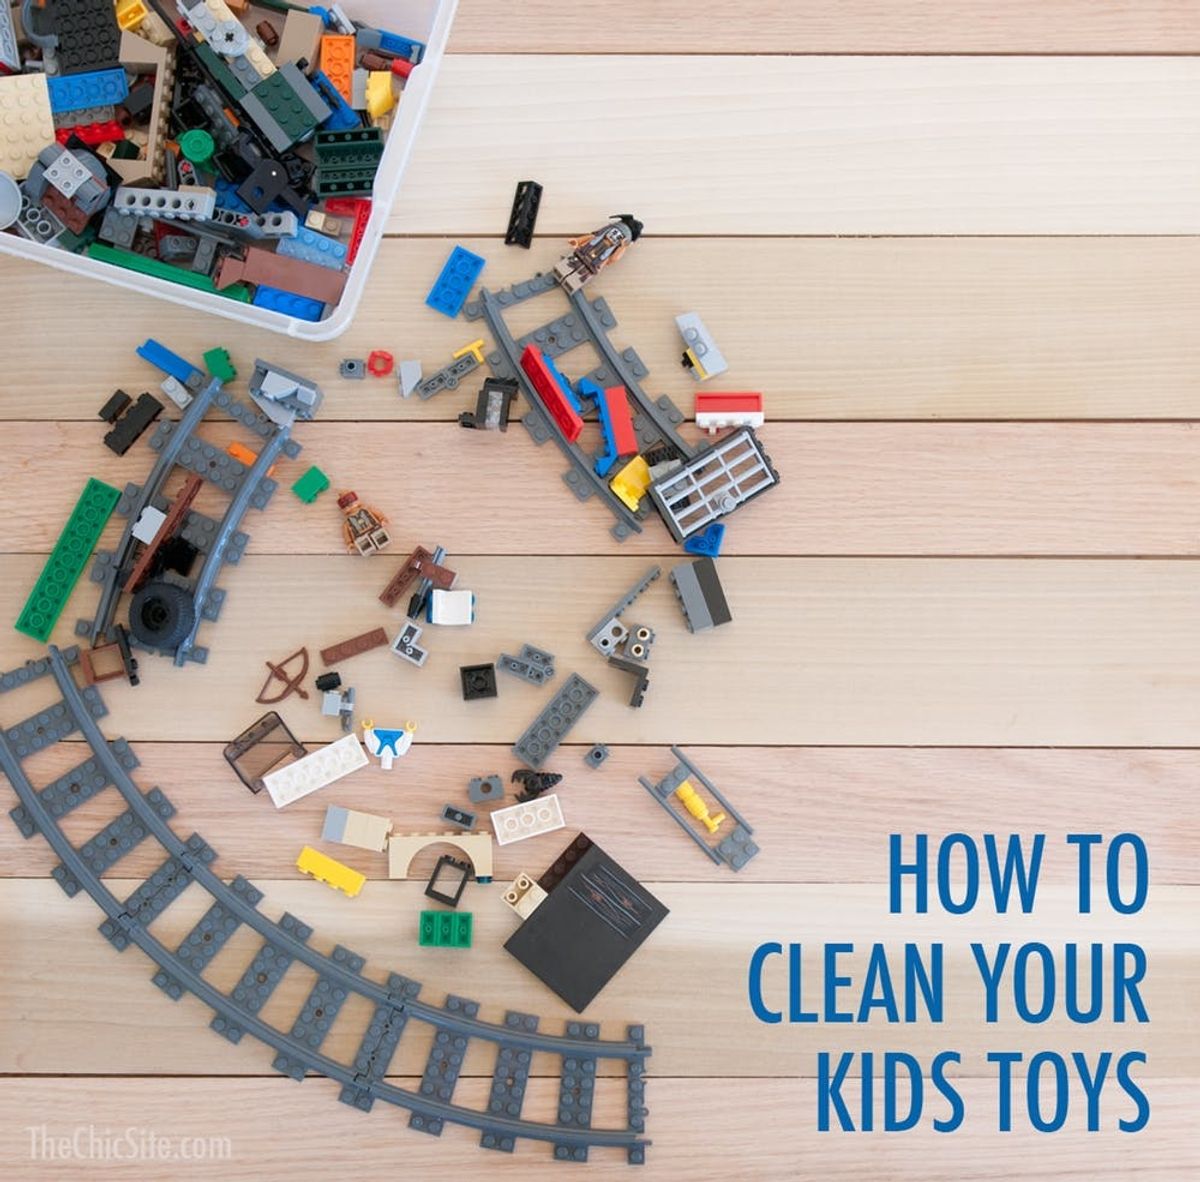 This Is the Easiest Kid’s Toy Cleaning Hack You Need to Know